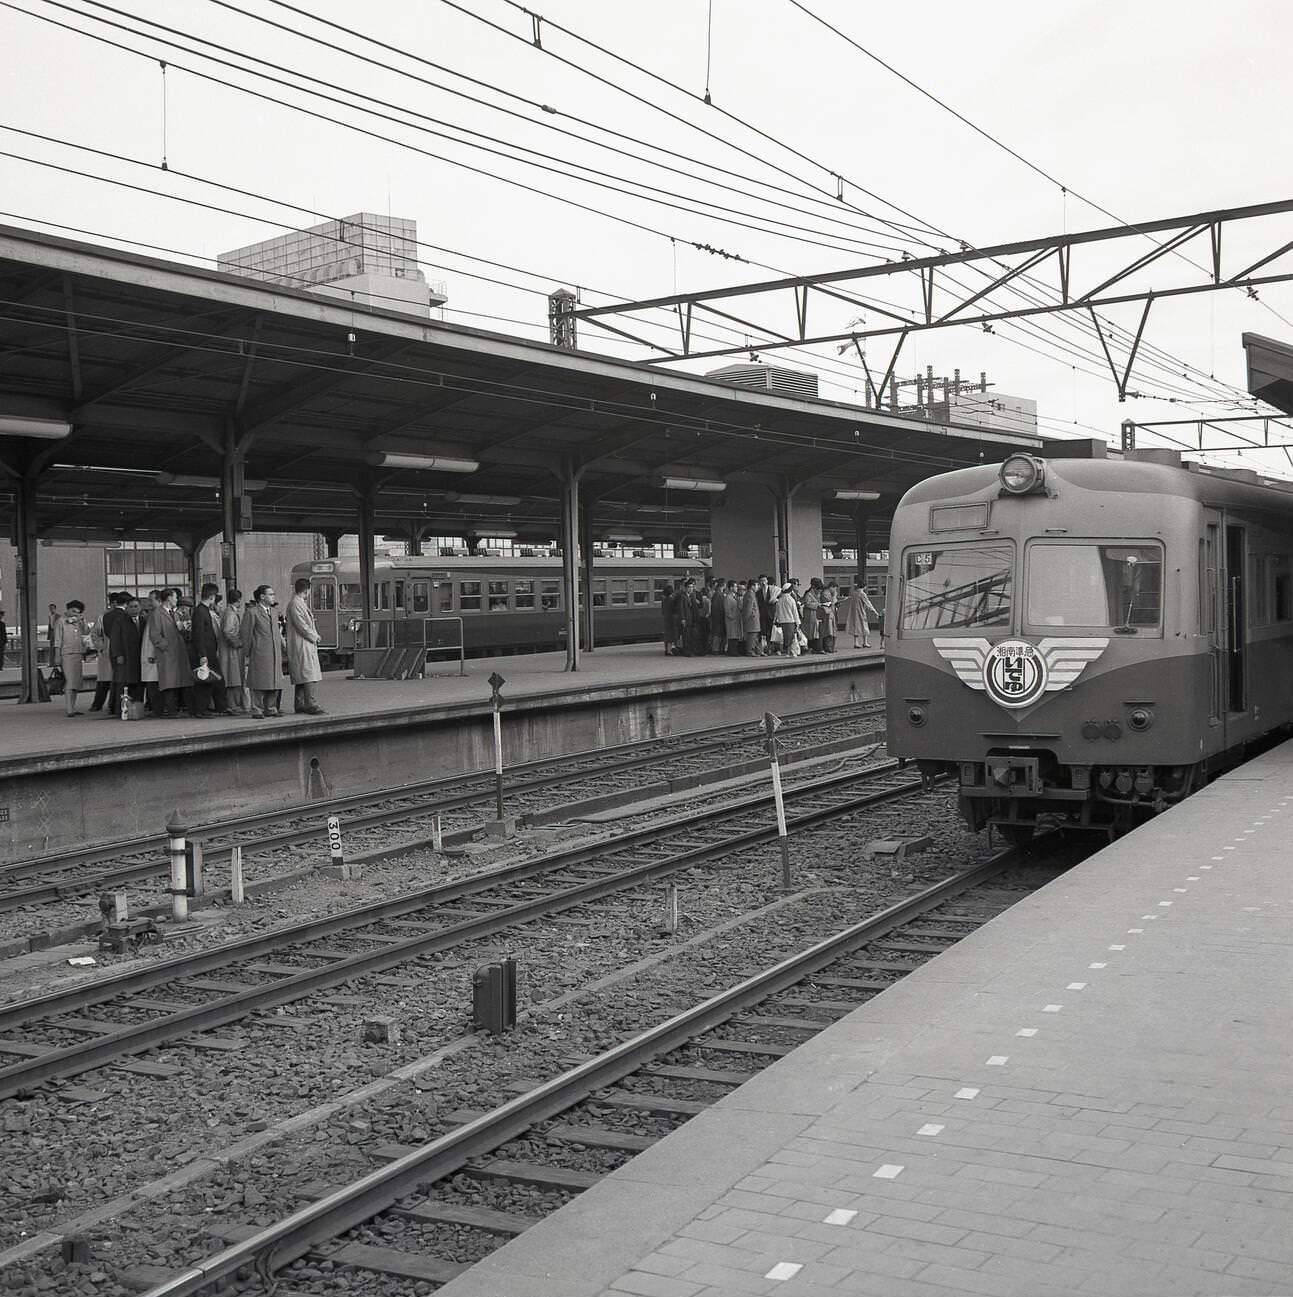 An overground train arrives on one platform, while Japanese rail commuters wait for their train to arrive, 1950s.